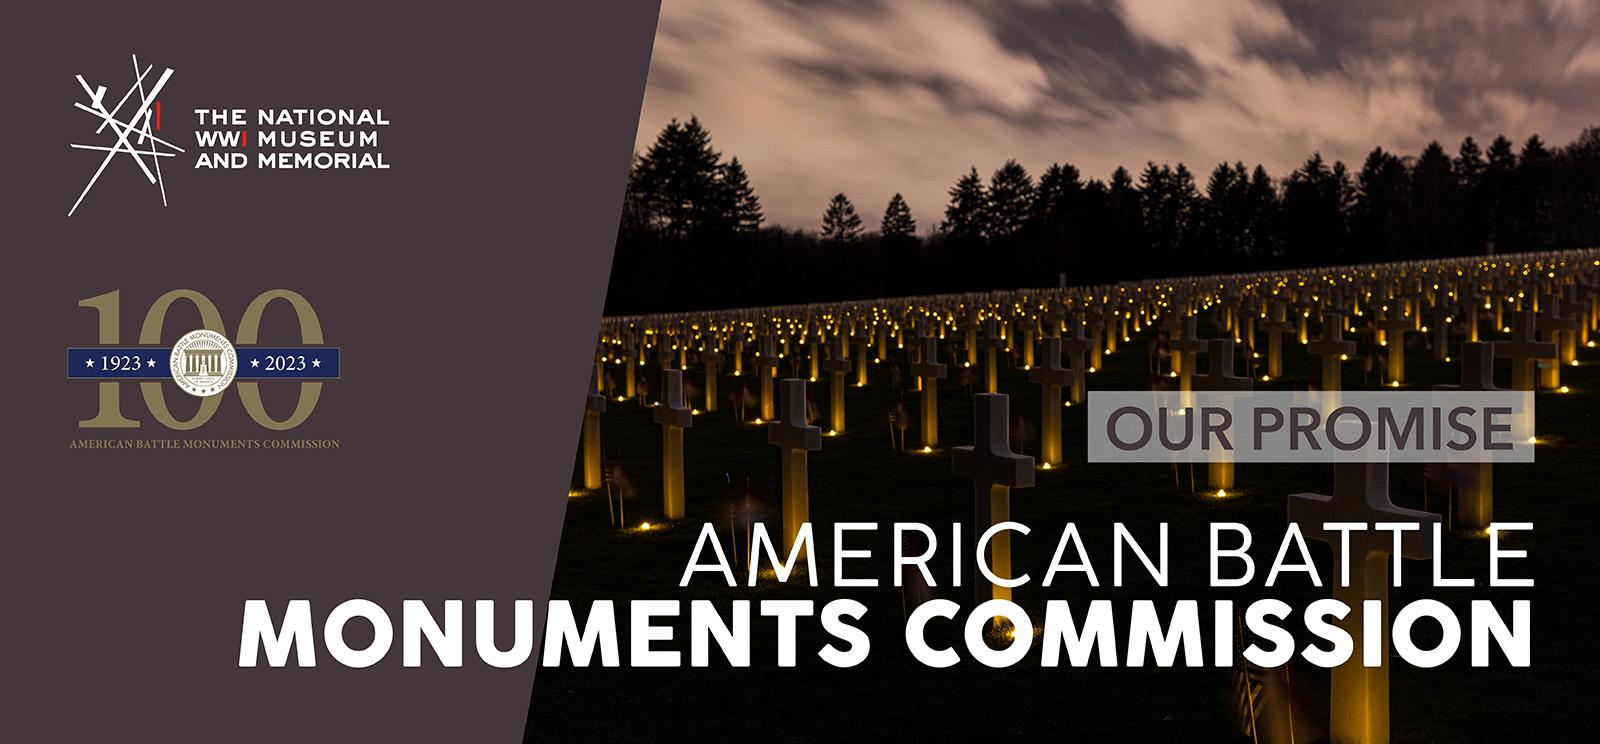 Image: Cemetary filled with rows of white crosses at night, each lit by a small candle or light at its base. Text: 'Our Promise / American Battle Monuments Commission'